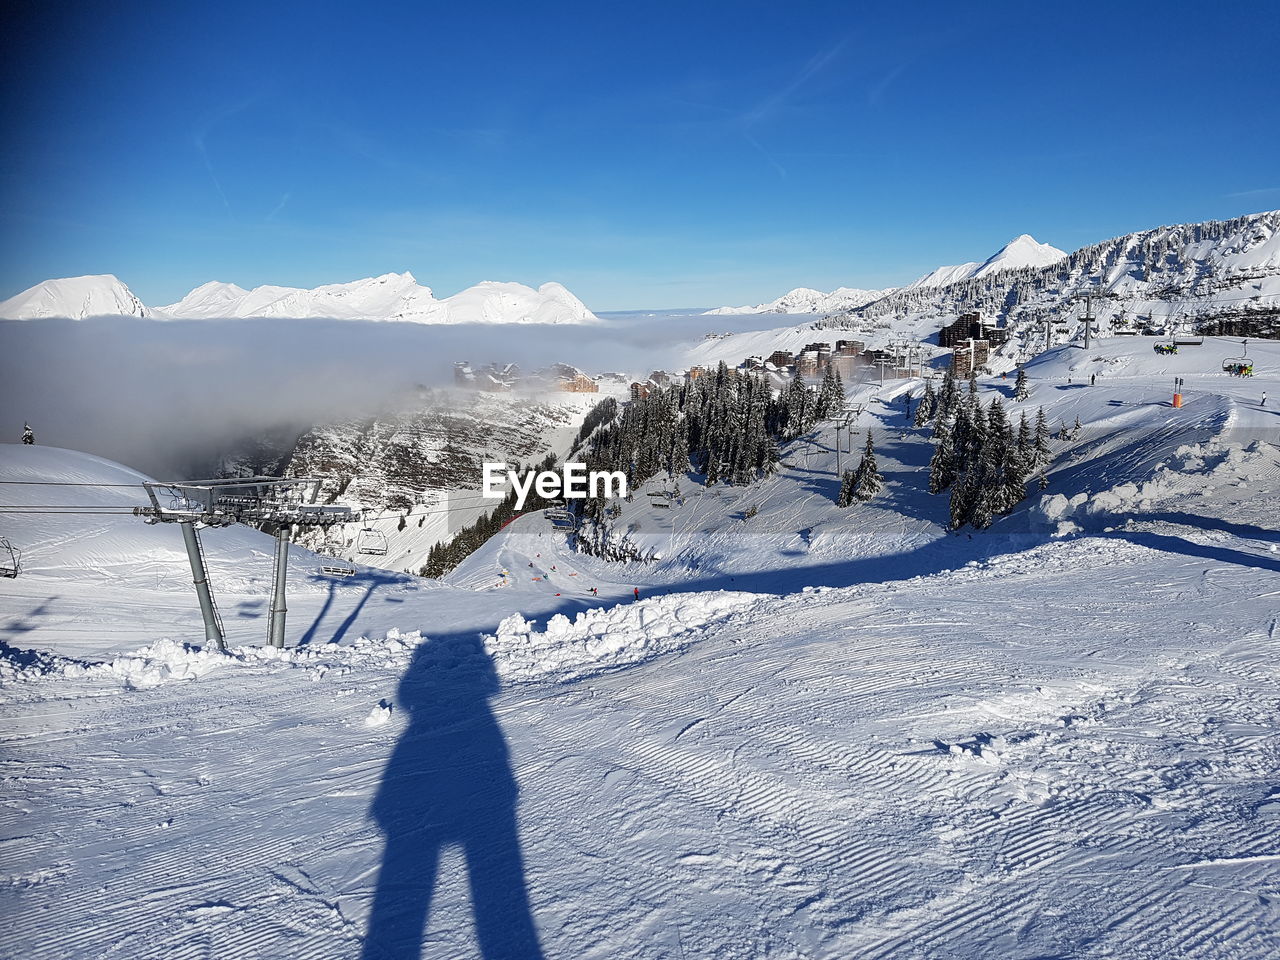 SHADOW OF PERSON ON SNOW COVERED MOUNTAIN